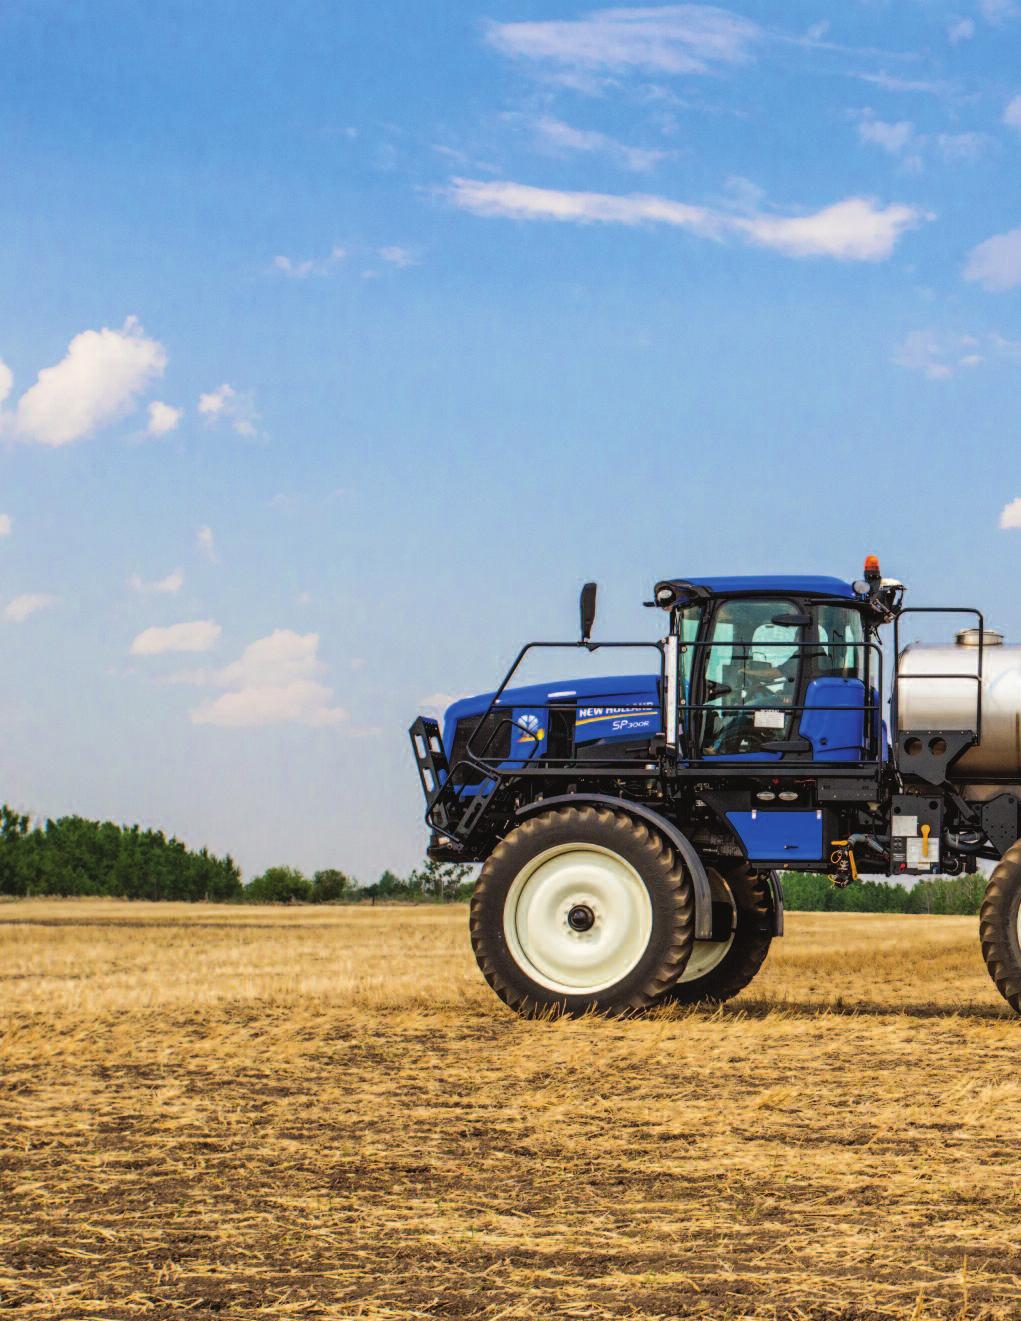 2 3 OVERVIEW PROTECT YOUR CROPS QUICKLY, EFFICIENTLY AND ON YOUR OWN SCHEDULE Guardian rear boom sprayers from New Holland put you in control, allowing you to spray whenever crop conditions warrant